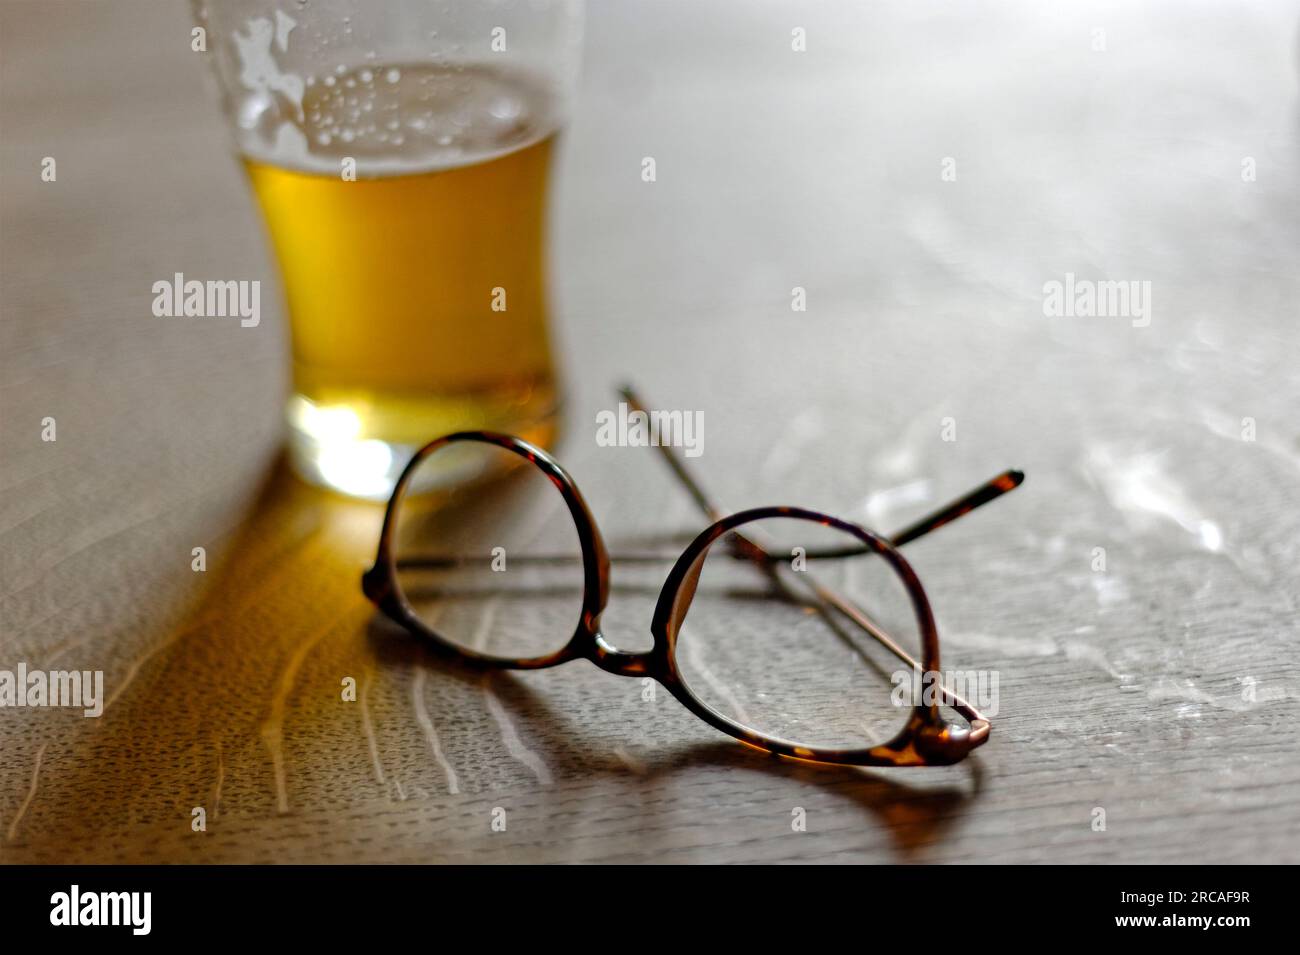 glasses and a beer on a table Stock Photo